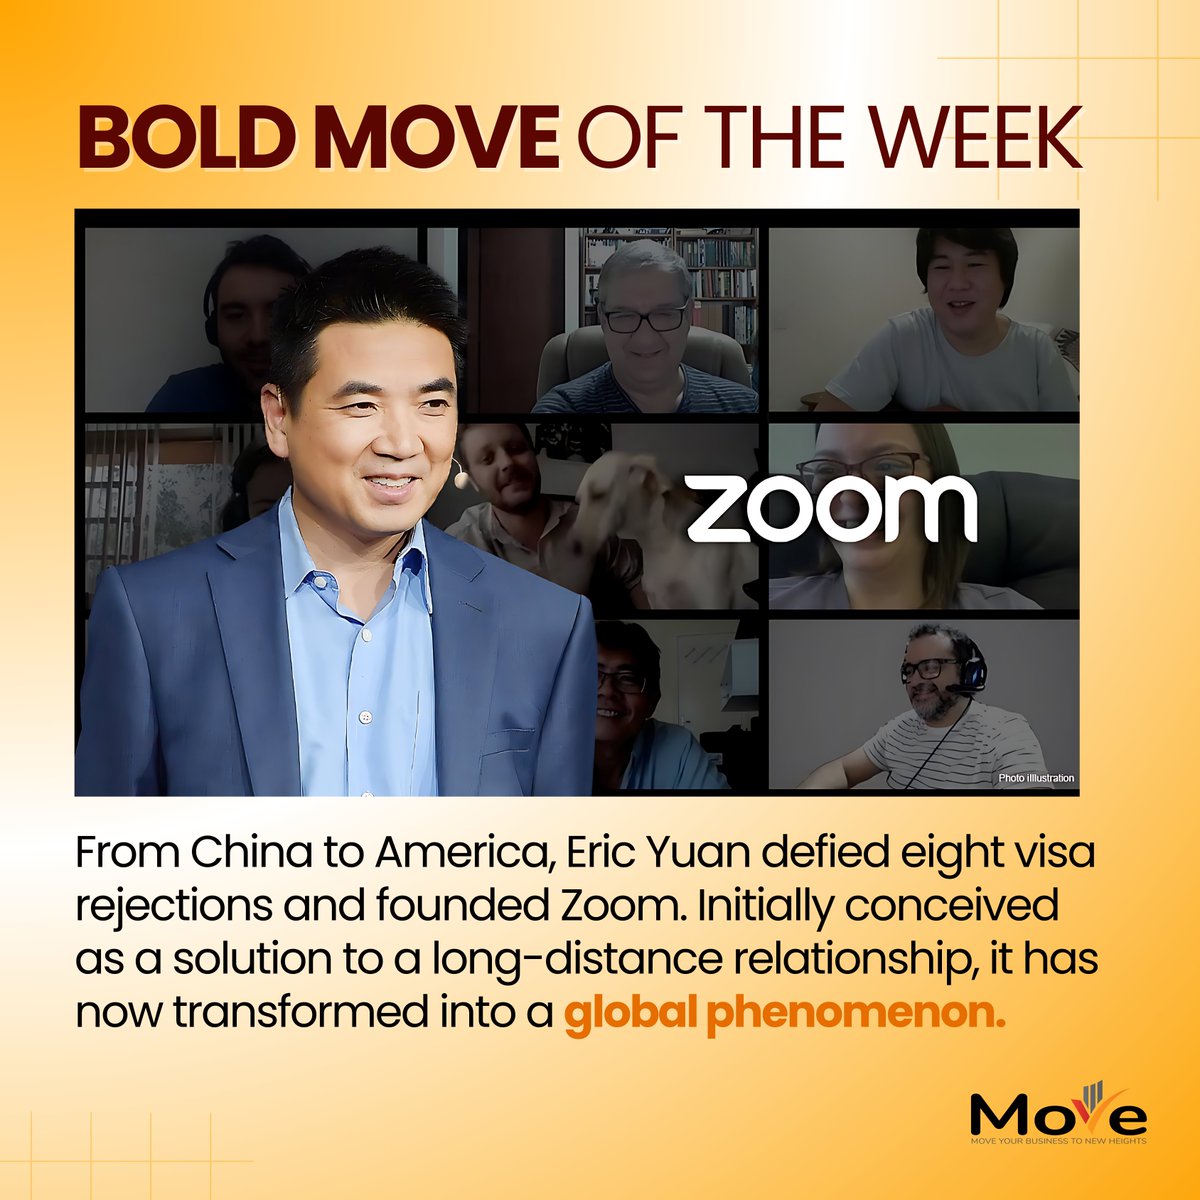 With 8 rejections under his belt, Eric Yuan powered through and shows what you can do with perseverance and innovation.

What will your bold move be? Find out with us!

Book a discovery call today:

🔗: moveyourbiz.com/contact/

#VirtualMeetings #RemoteWork #BusinessMove